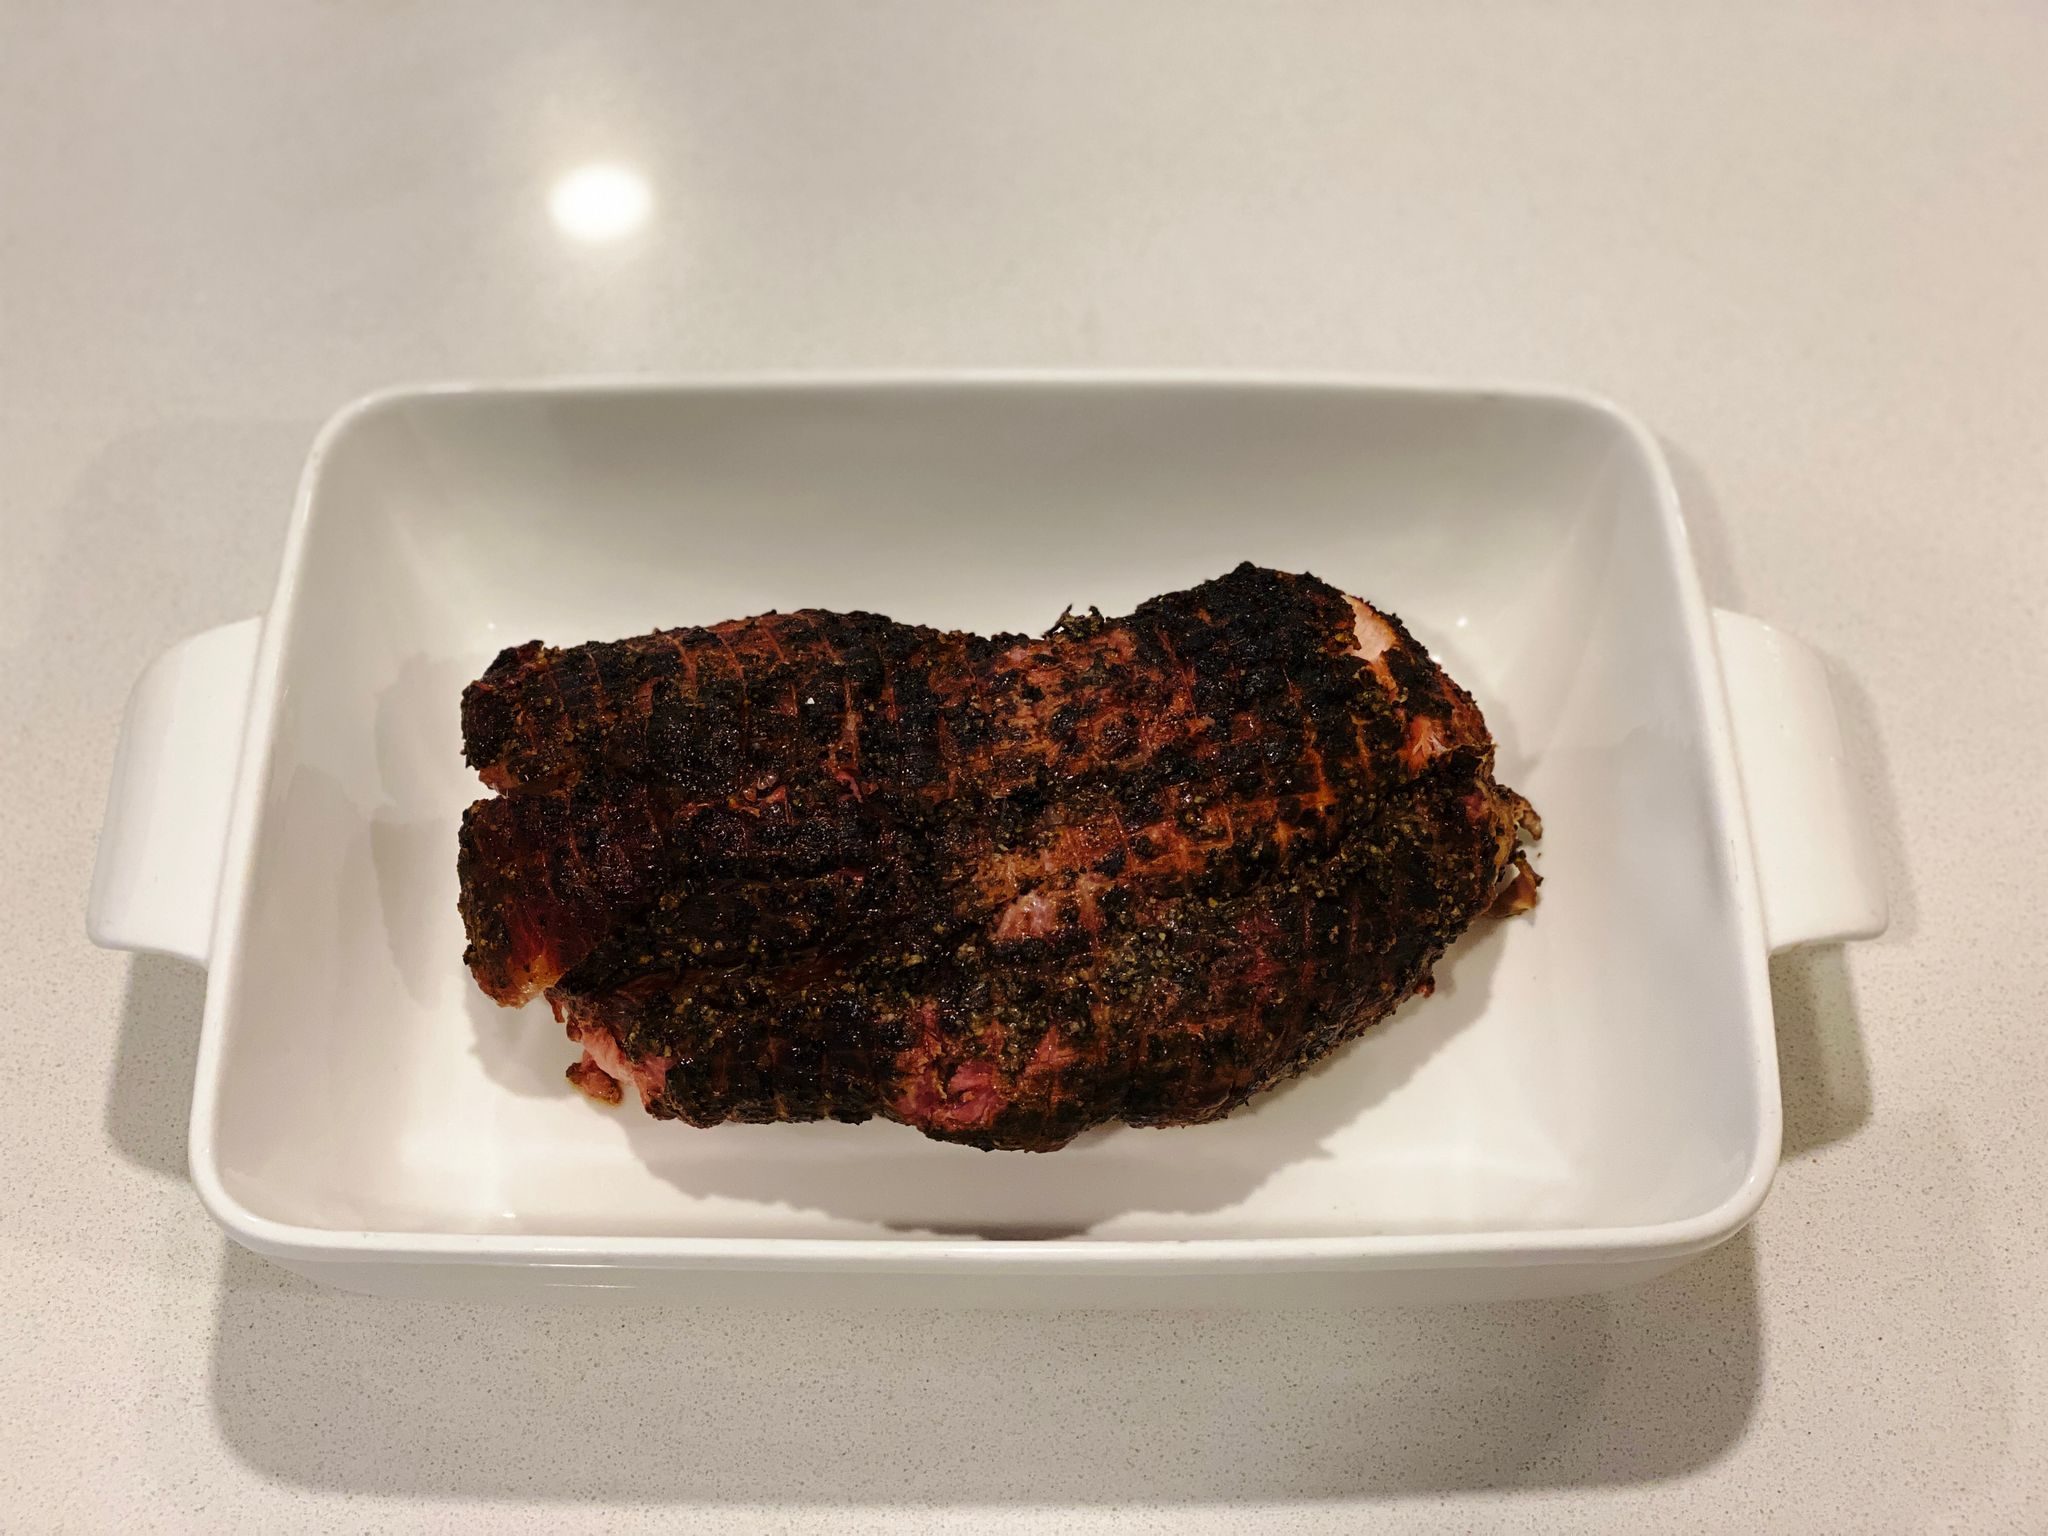 A photo of a fully-cooked and smoked pork collar butt sitting in a white ceramic dish. It's got a fantastic dark colour to the outside.